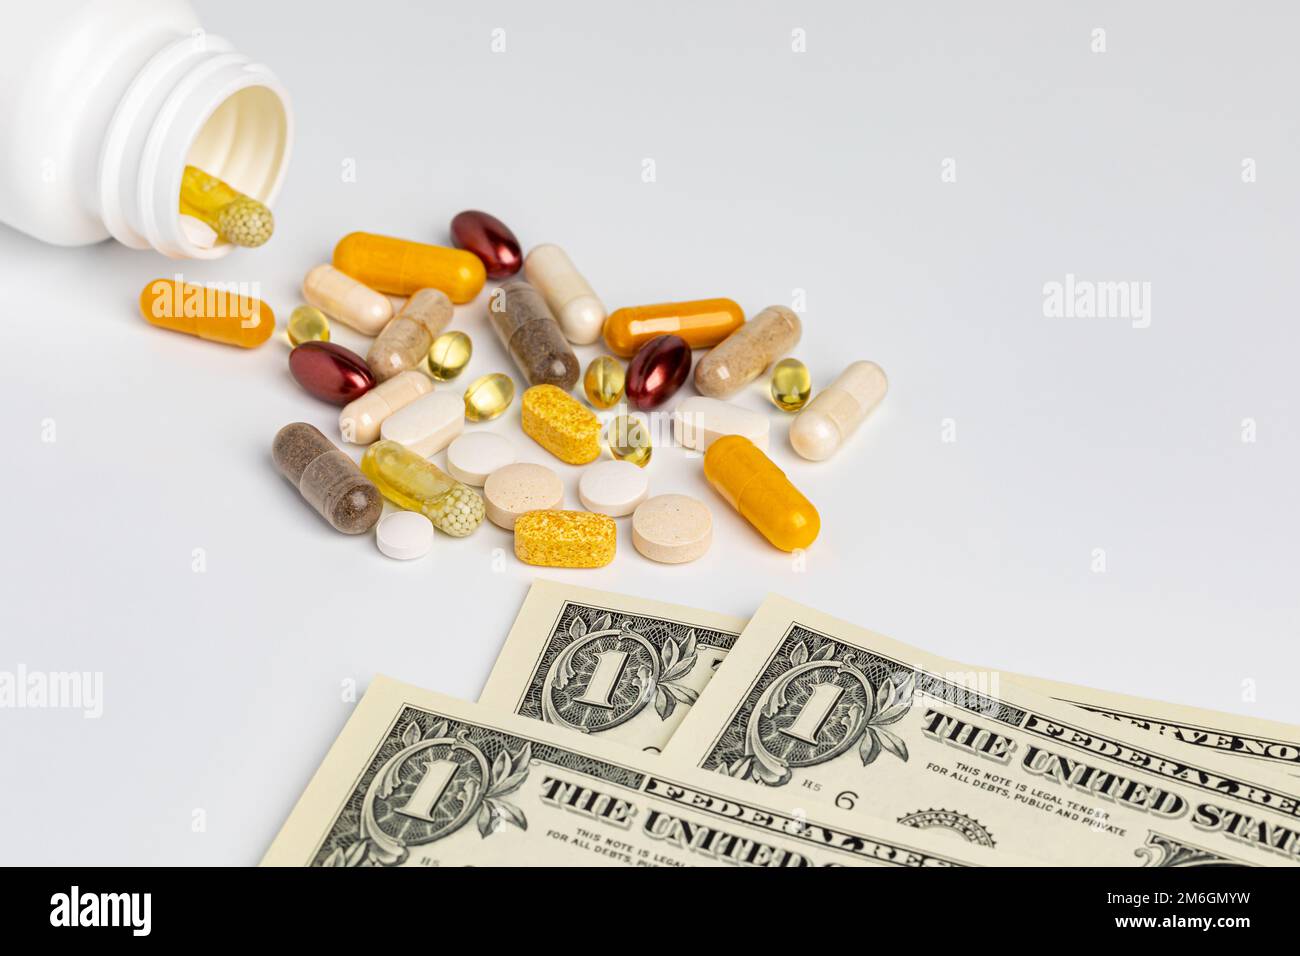 Pill bottle of vitamins and nutritional supplements with cash money isolated on white background. Wellness, health care and nutrition concept. Stock Photo